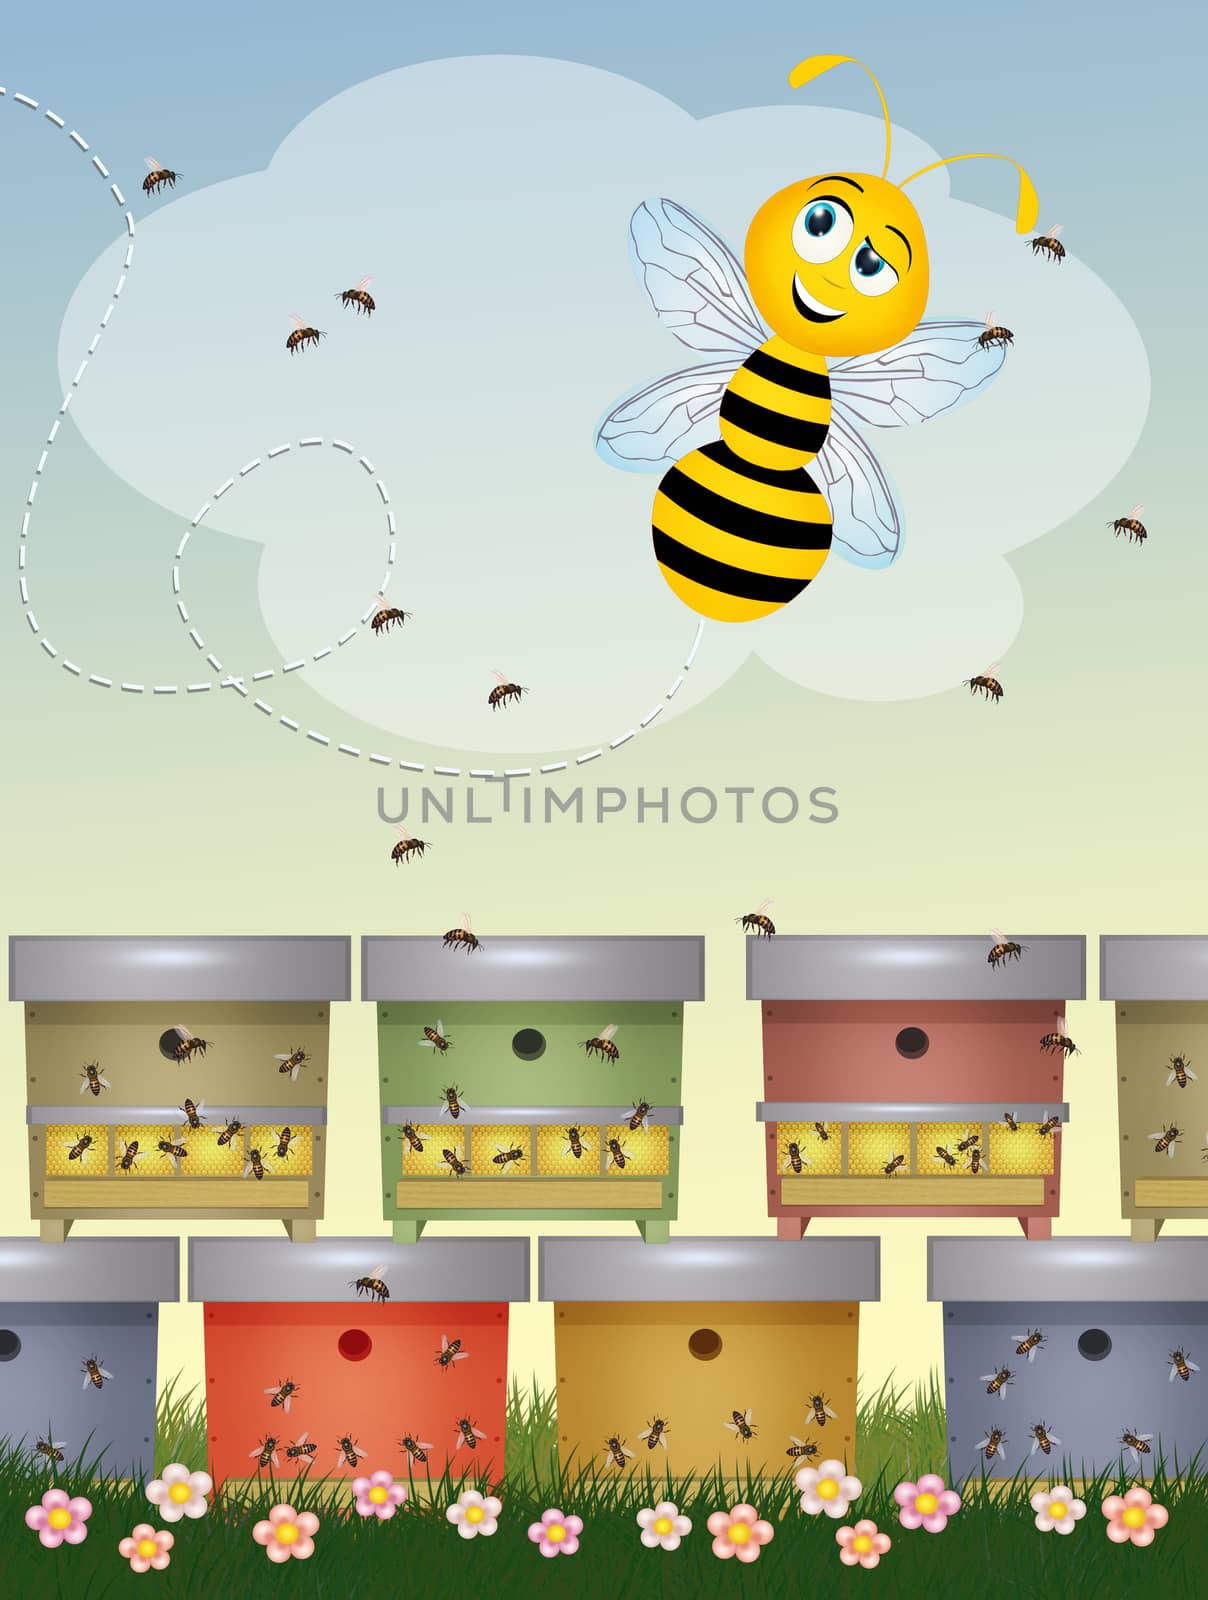 bees in the cells by adrenalina